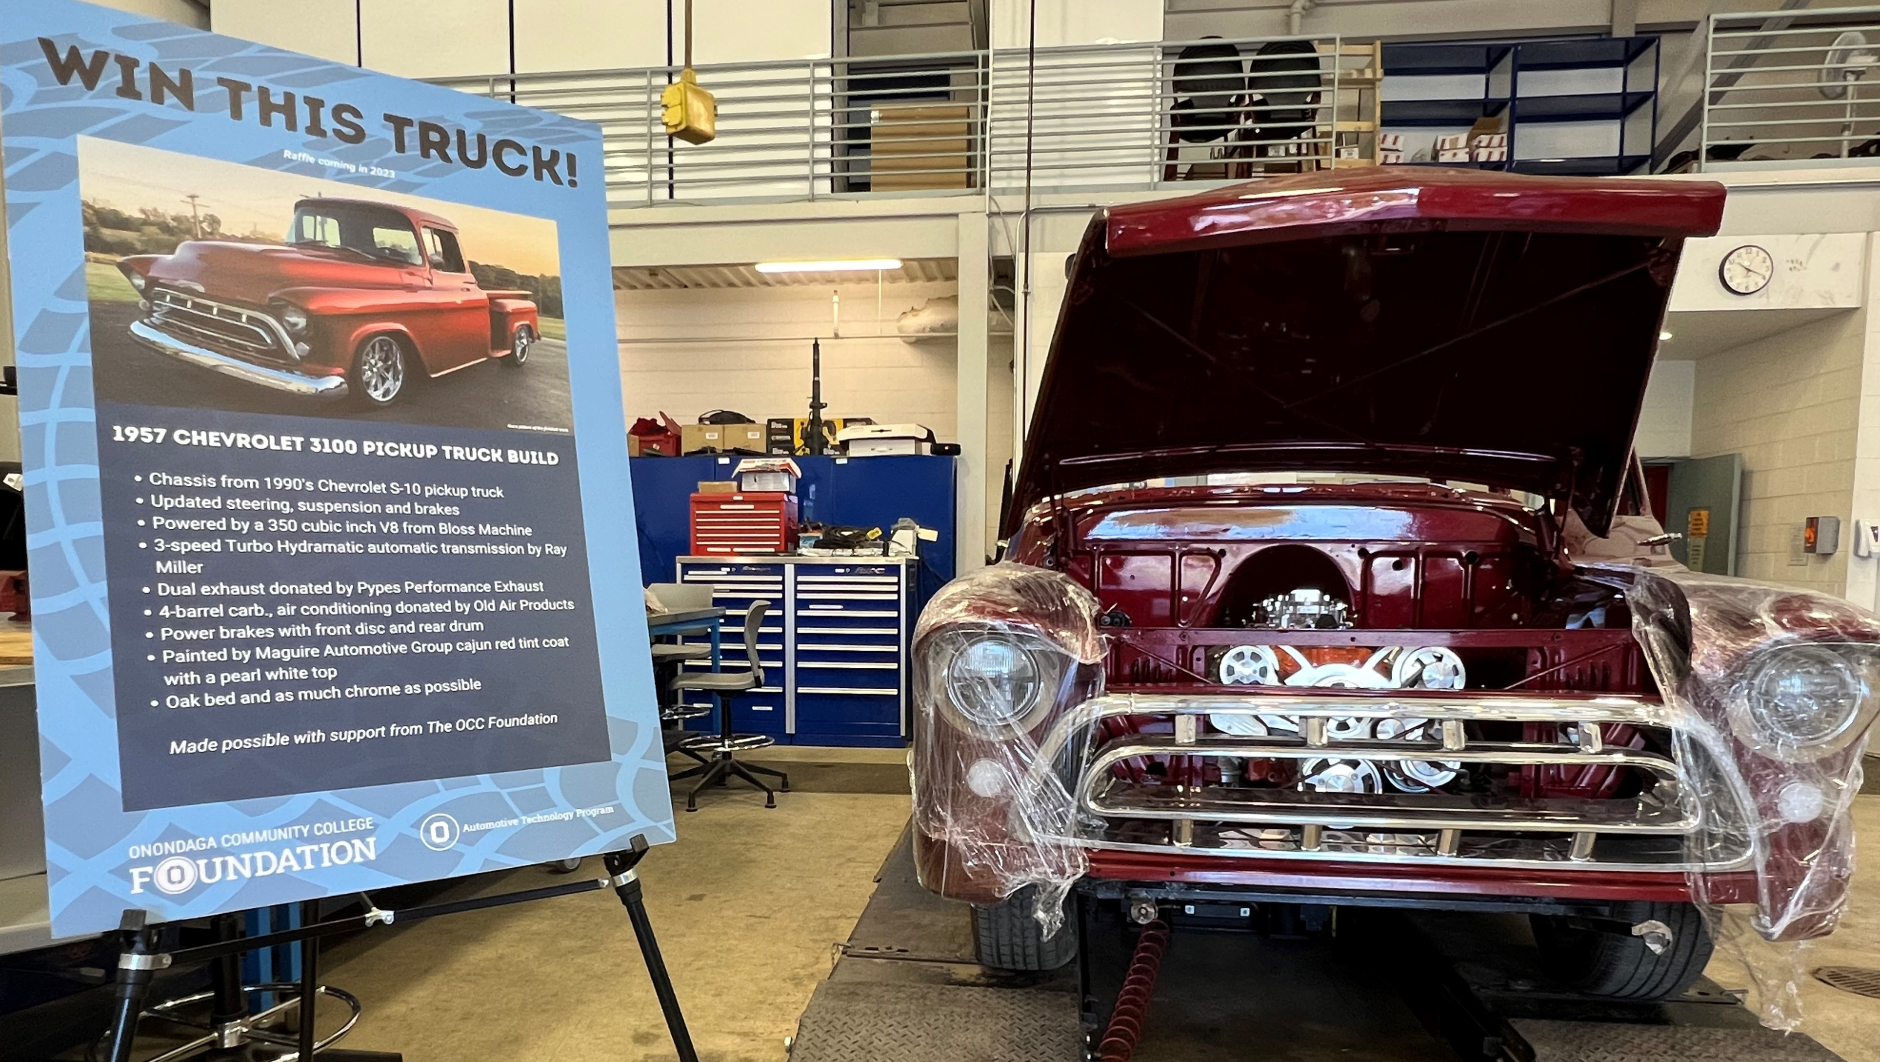 Students are working to restore this 1957 Chevy truck. When finished it will be raffled.